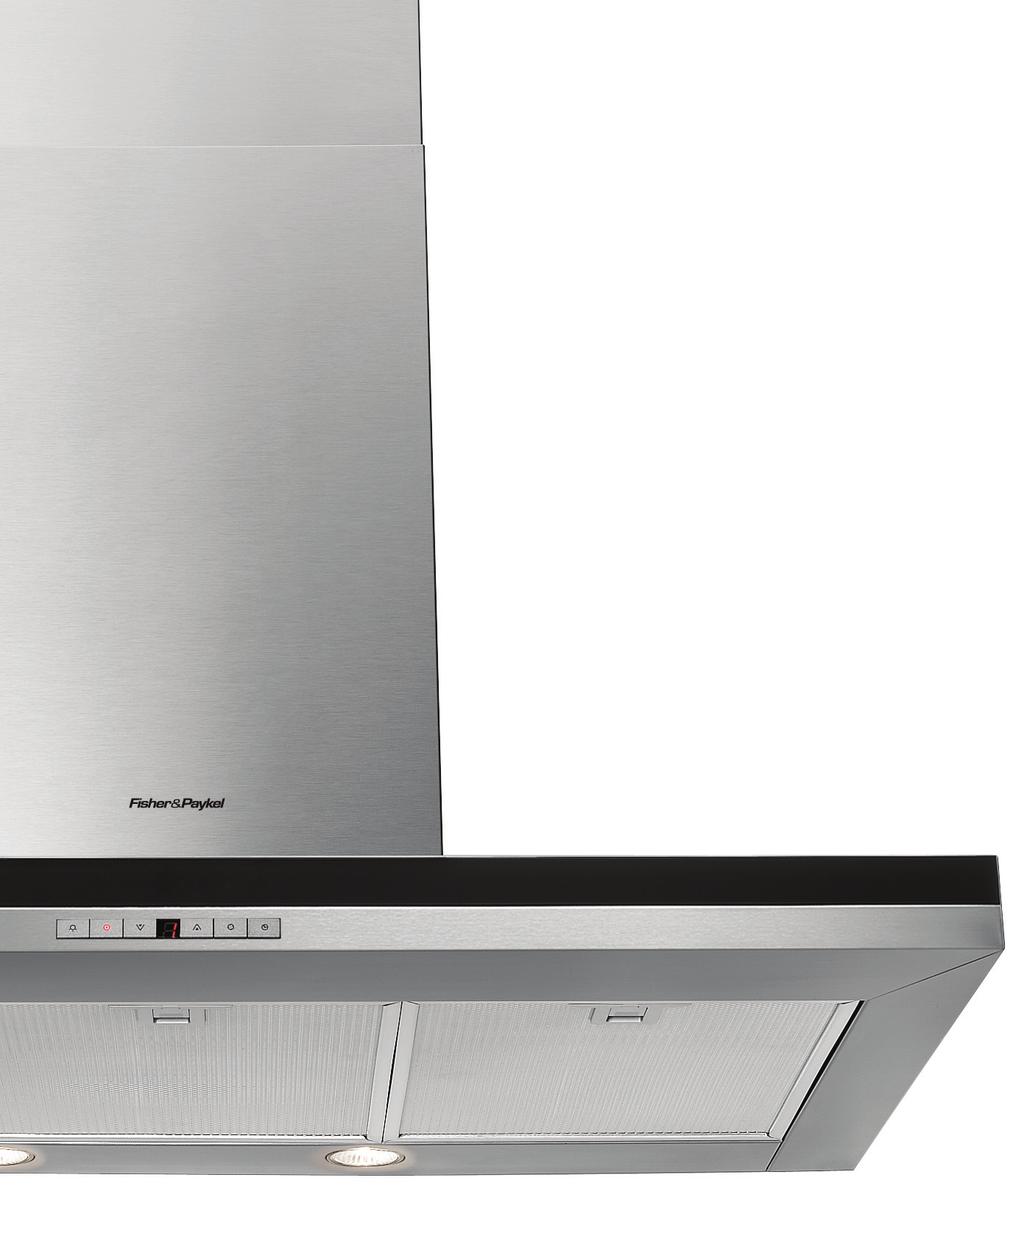 ventilation Key features Banish steam, smoke and lingering smells. Fisher & Paykel vent hoods offer a selection of fan speeds and clever features that quietly and efficiently remove them all.